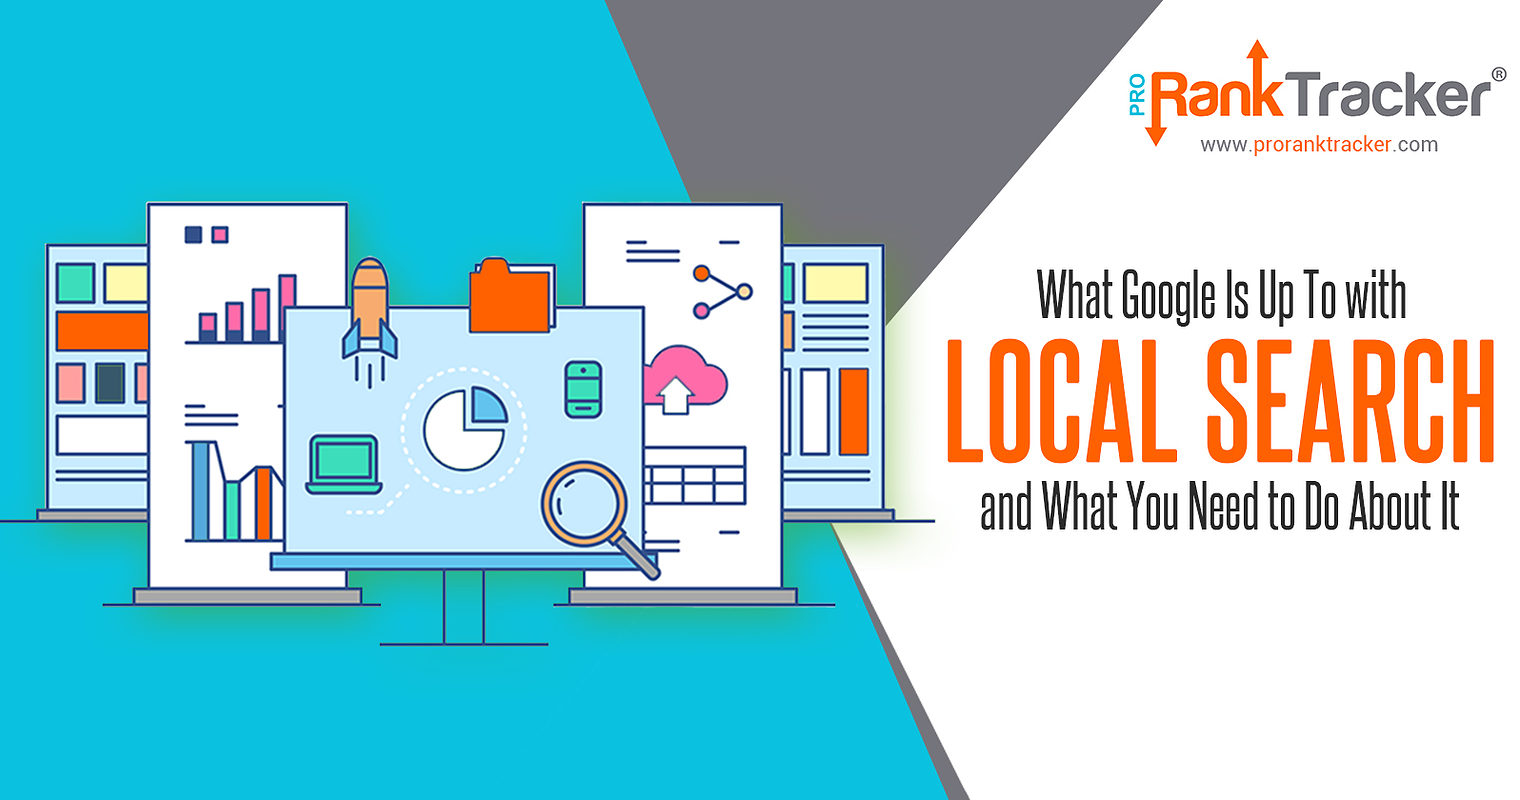 Google Drive: How to rank your local business